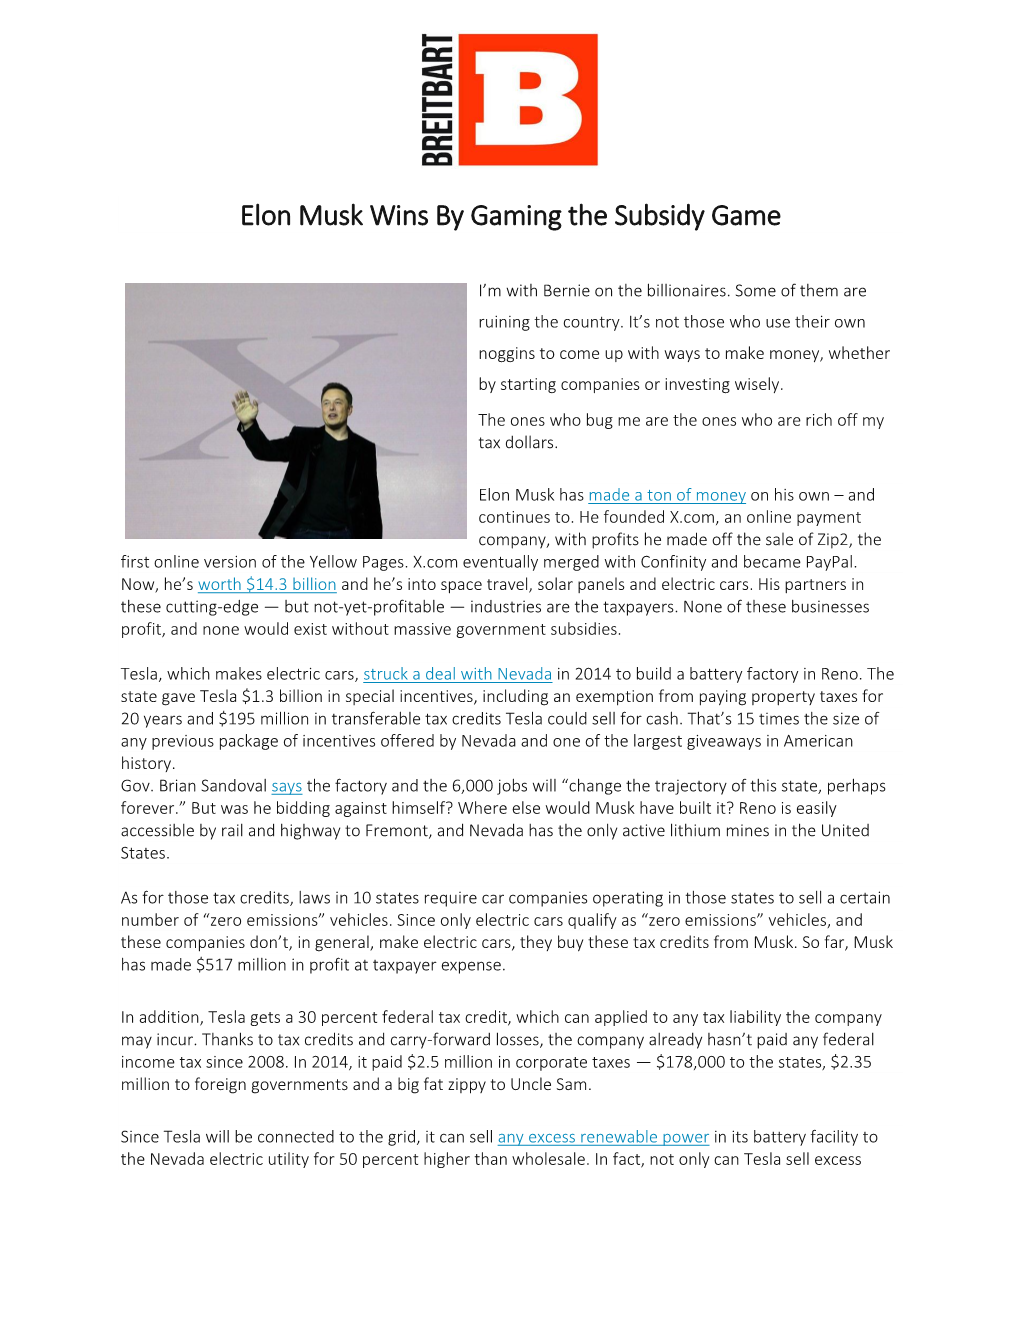 Elon Musk Wins by Gaming the Subsidy Game